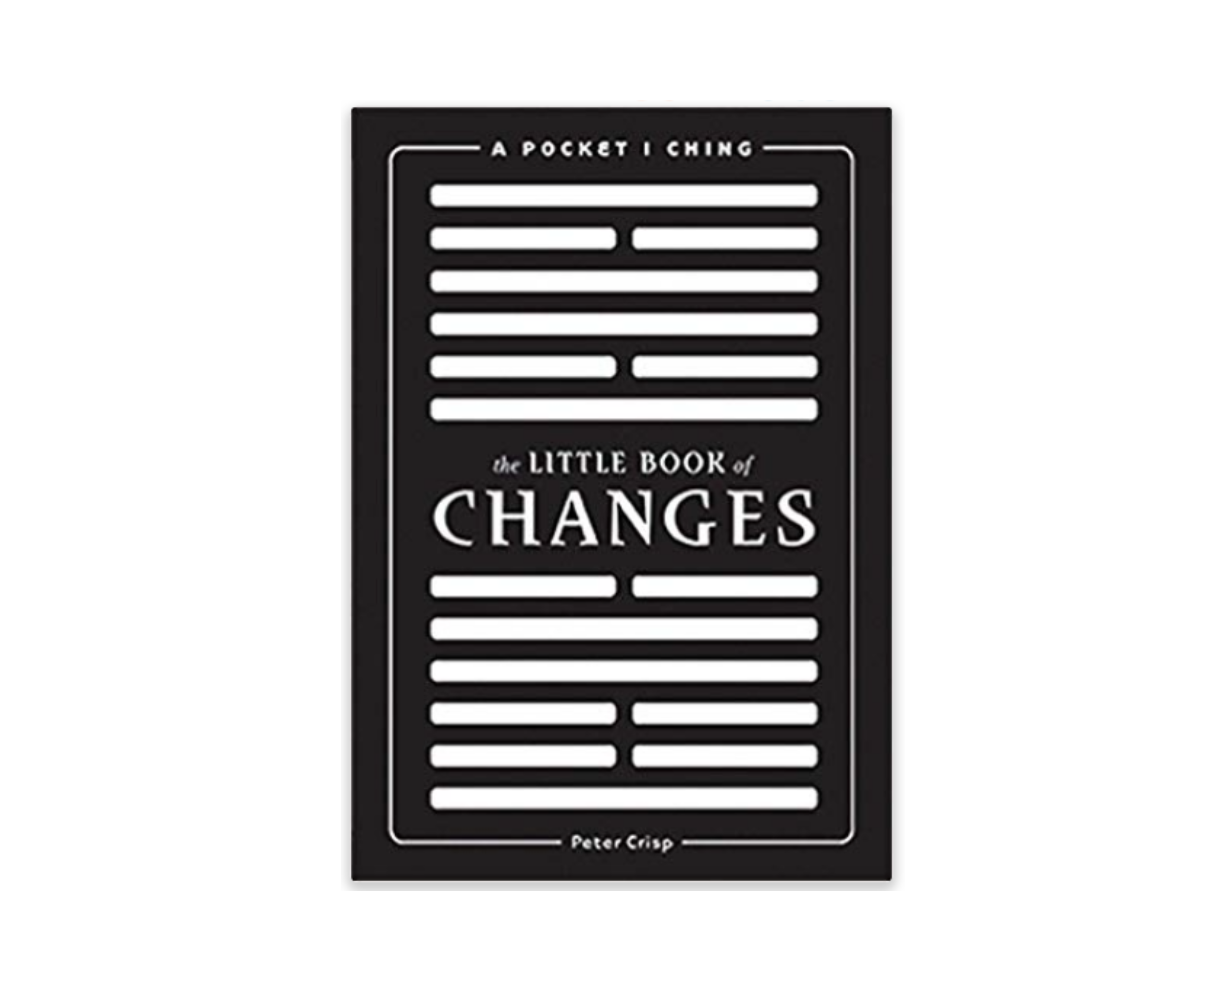 Little Book of Changes